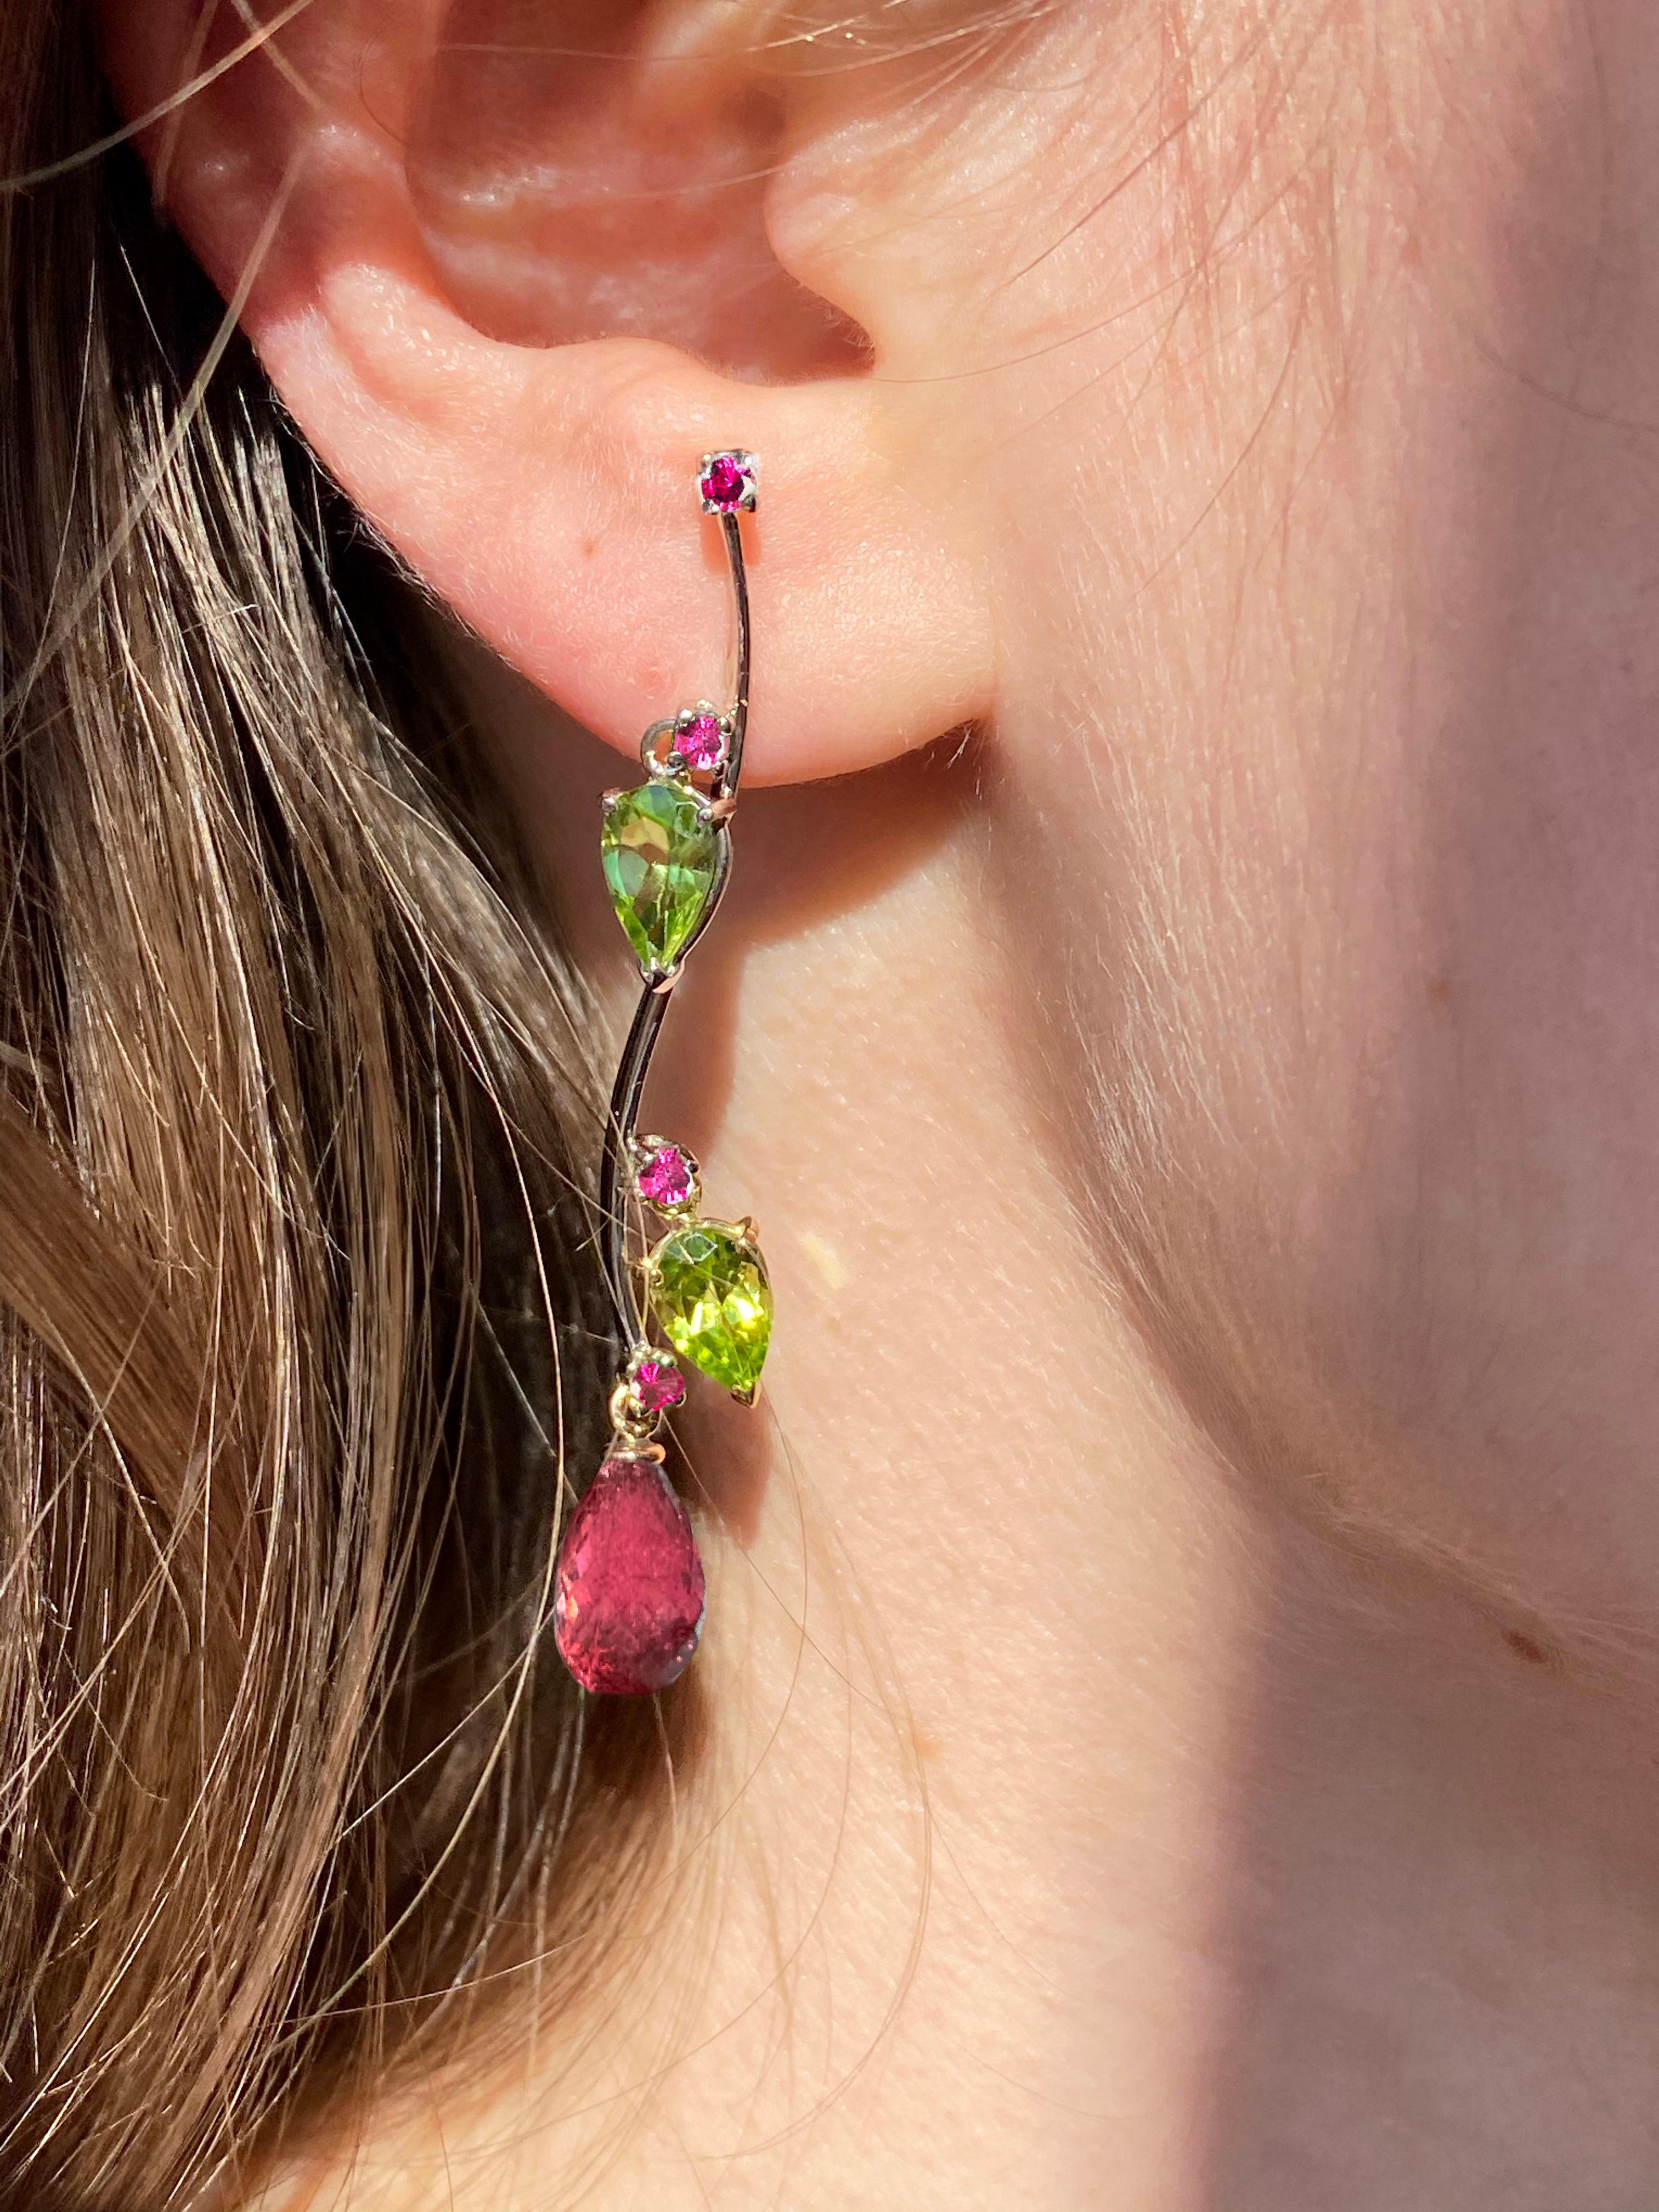 Rossella Ugolini Design Collection, these 18k Yellow Gold Earrings are a true masterpiece handcrafted in Italy by skilled artisans with precious gemstones like red Rubelite Tourmaline, and Peridot. They Unique Design takes inspiration from the